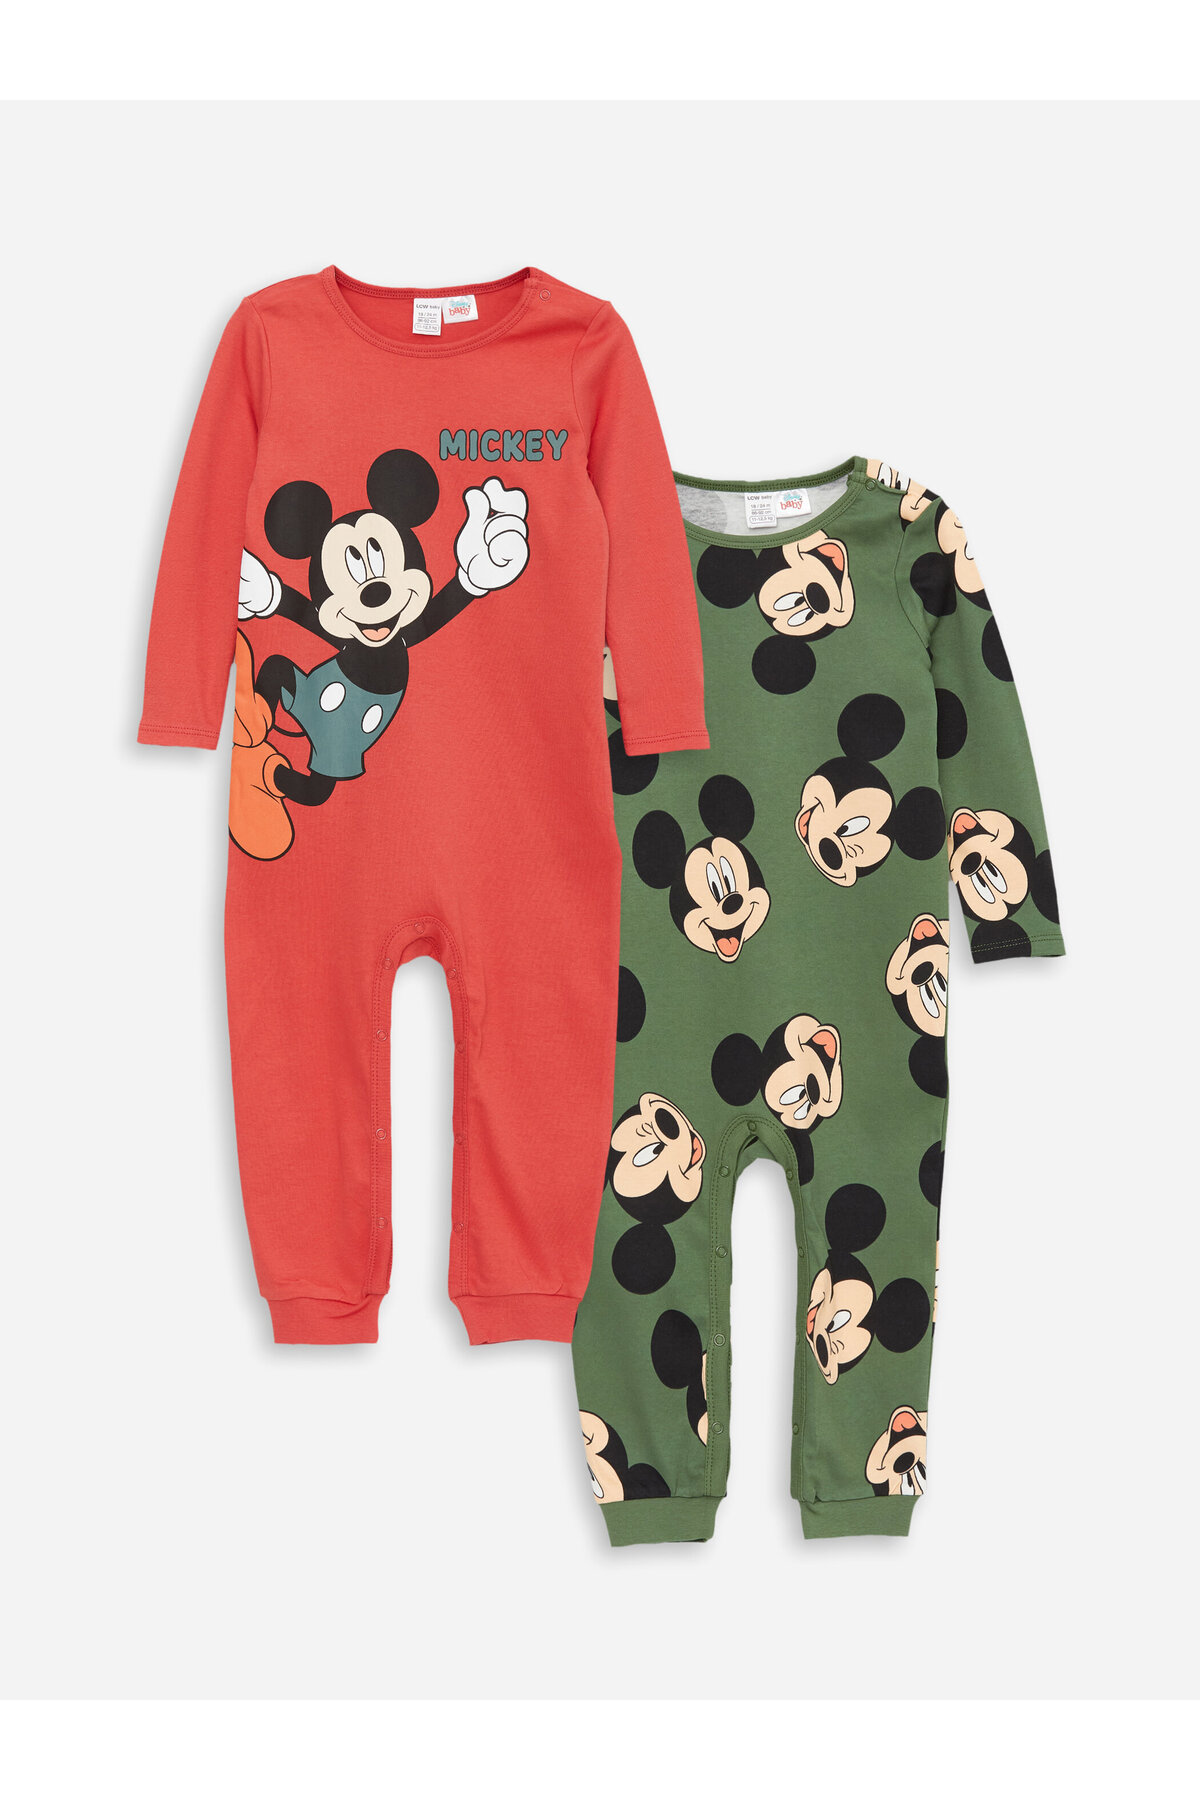 LC Waikiki Crew Neck Long Sleeve Mickey Mouse Printed Baby Boy Rompers Pack Of 2